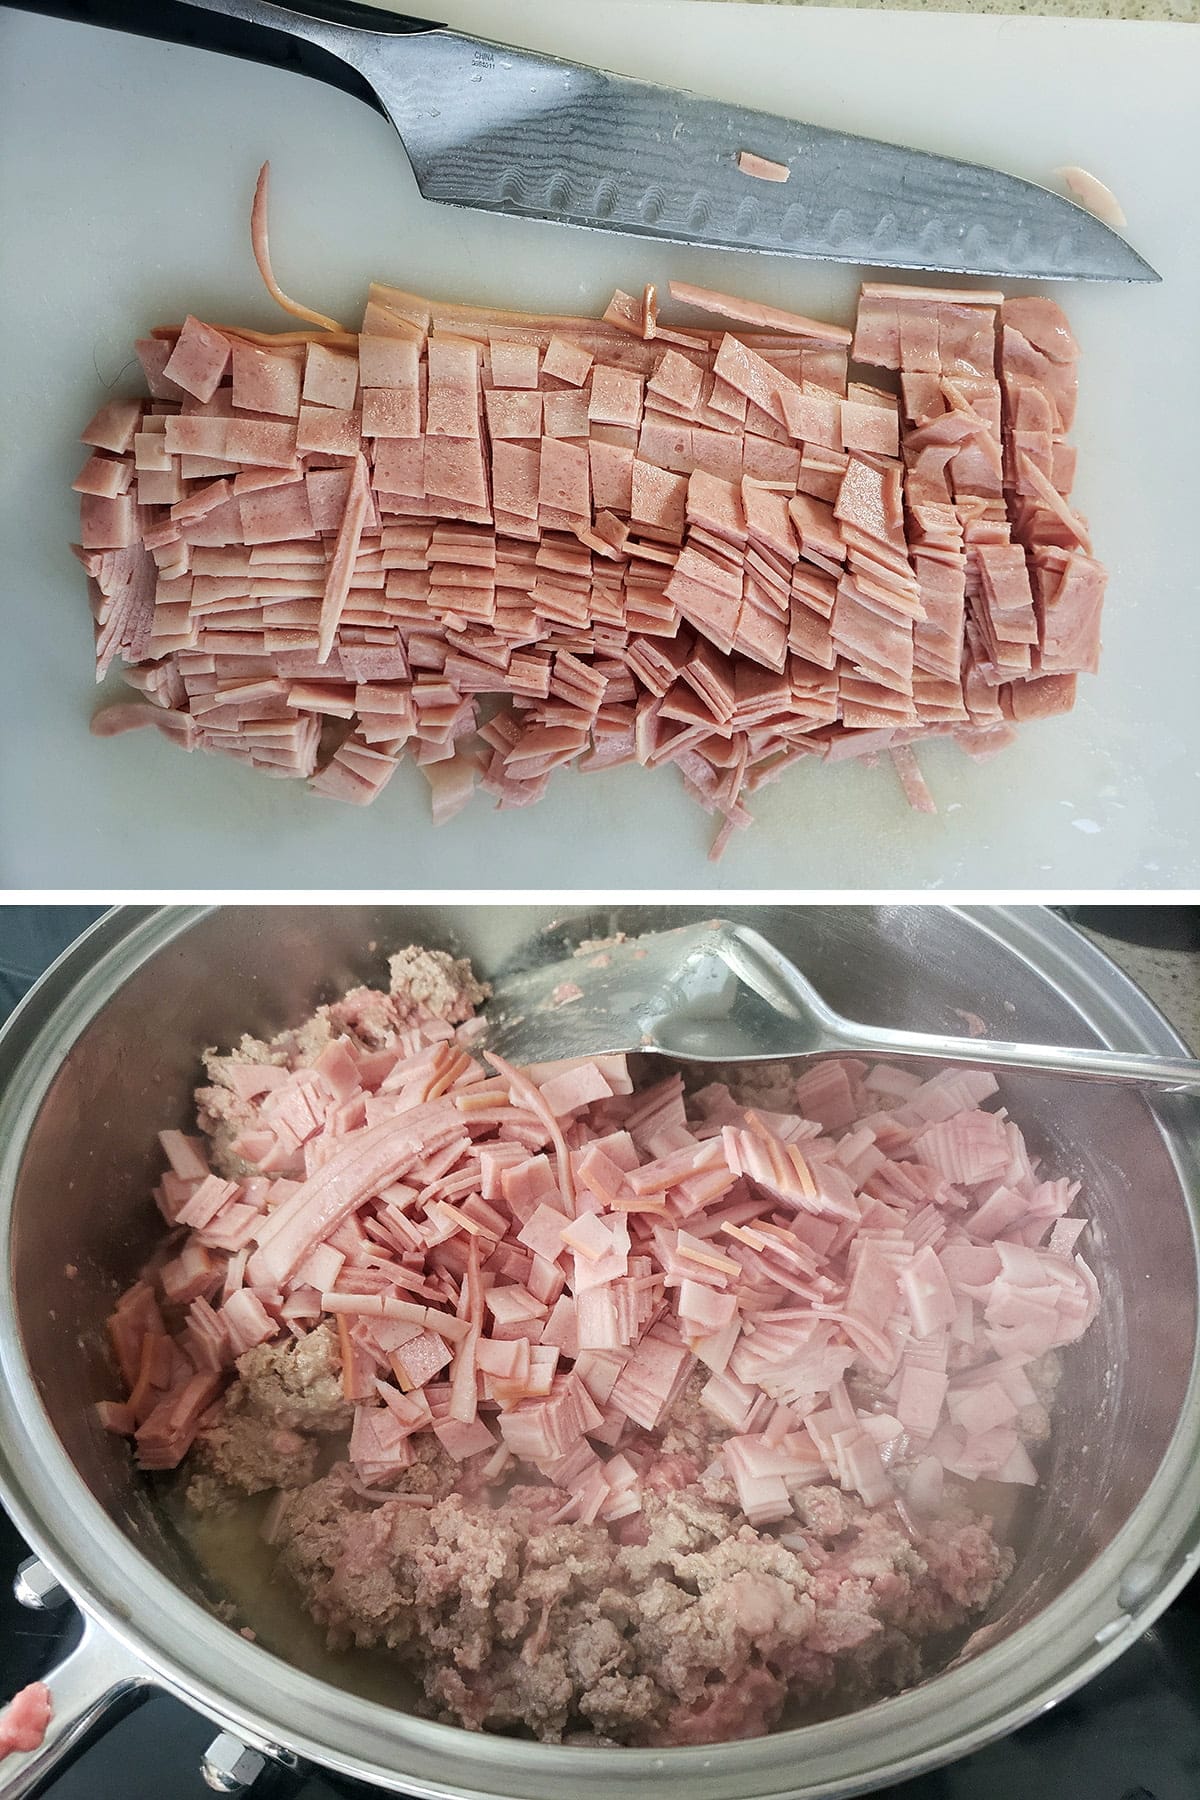 A two part compilation image showing chicken bacon cut up, and being added to the pan of ground chicken.